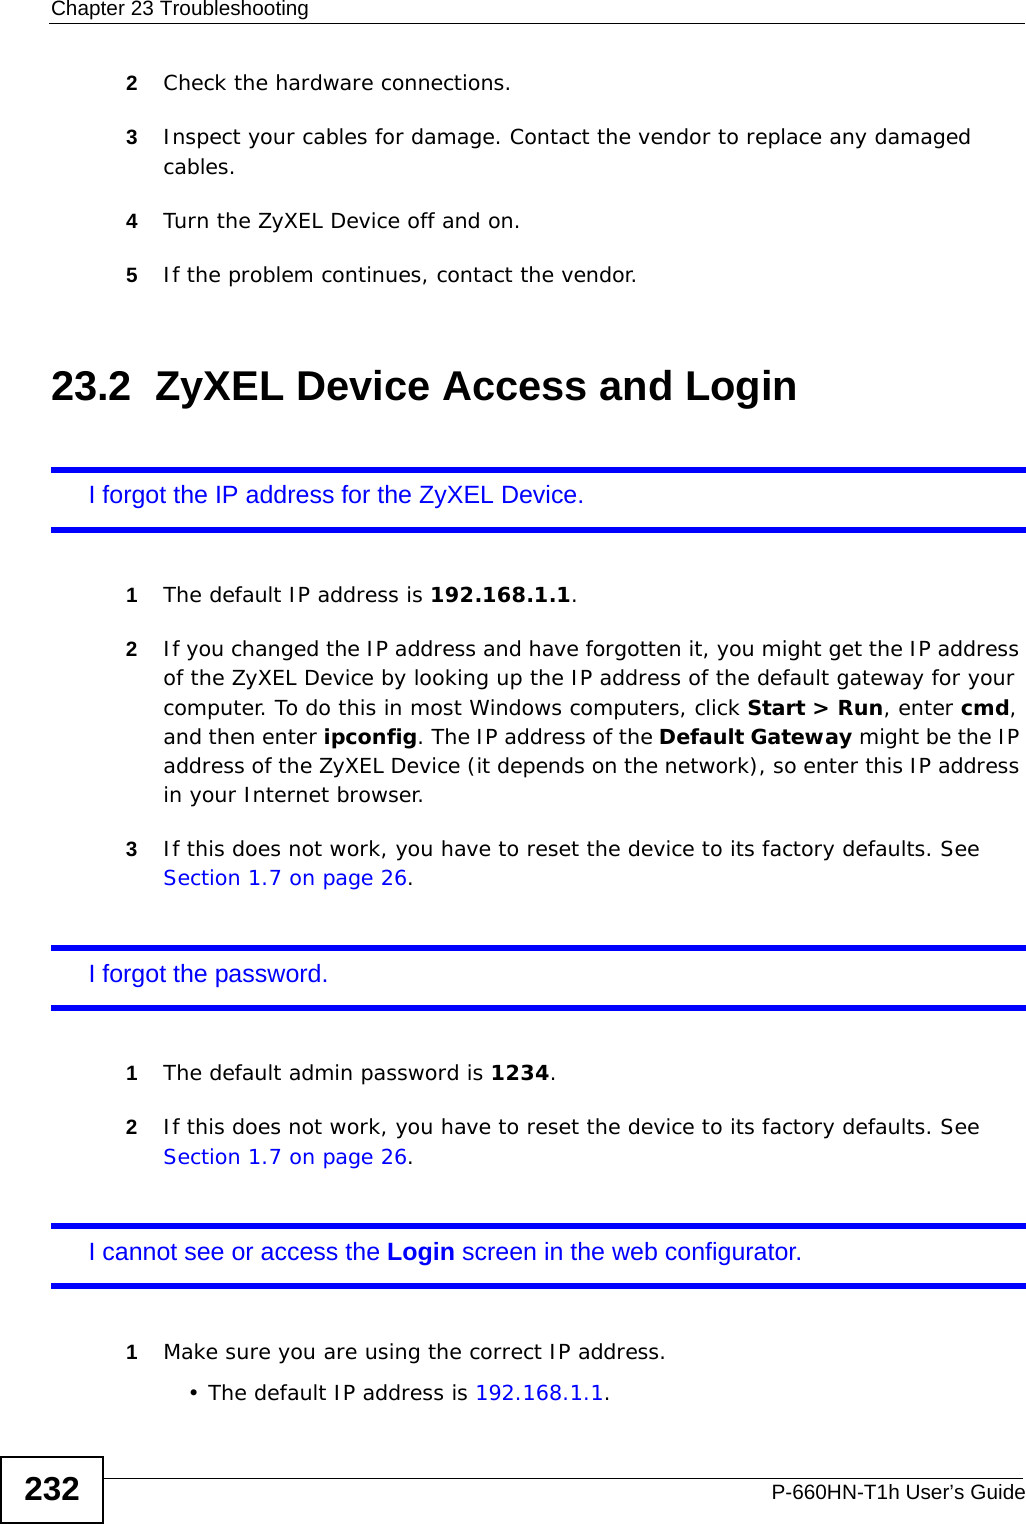 Chapter 23 TroubleshootingP-660HN-T1h User’s Guide2322Check the hardware connections.3Inspect your cables for damage. Contact the vendor to replace any damaged cables.4Turn the ZyXEL Device off and on.5If the problem continues, contact the vendor.23.2  ZyXEL Device Access and LoginI forgot the IP address for the ZyXEL Device.1The default IP address is 192.168.1.1.2If you changed the IP address and have forgotten it, you might get the IP address of the ZyXEL Device by looking up the IP address of the default gateway for your computer. To do this in most Windows computers, click Start &gt; Run, enter cmd, and then enter ipconfig. The IP address of the Default Gateway might be the IP address of the ZyXEL Device (it depends on the network), so enter this IP address in your Internet browser.3If this does not work, you have to reset the device to its factory defaults. See Section 1.7 on page 26.I forgot the password.1The default admin password is 1234.2If this does not work, you have to reset the device to its factory defaults. See Section 1.7 on page 26.I cannot see or access the Login screen in the web configurator.1Make sure you are using the correct IP address.• The default IP address is 192.168.1.1.